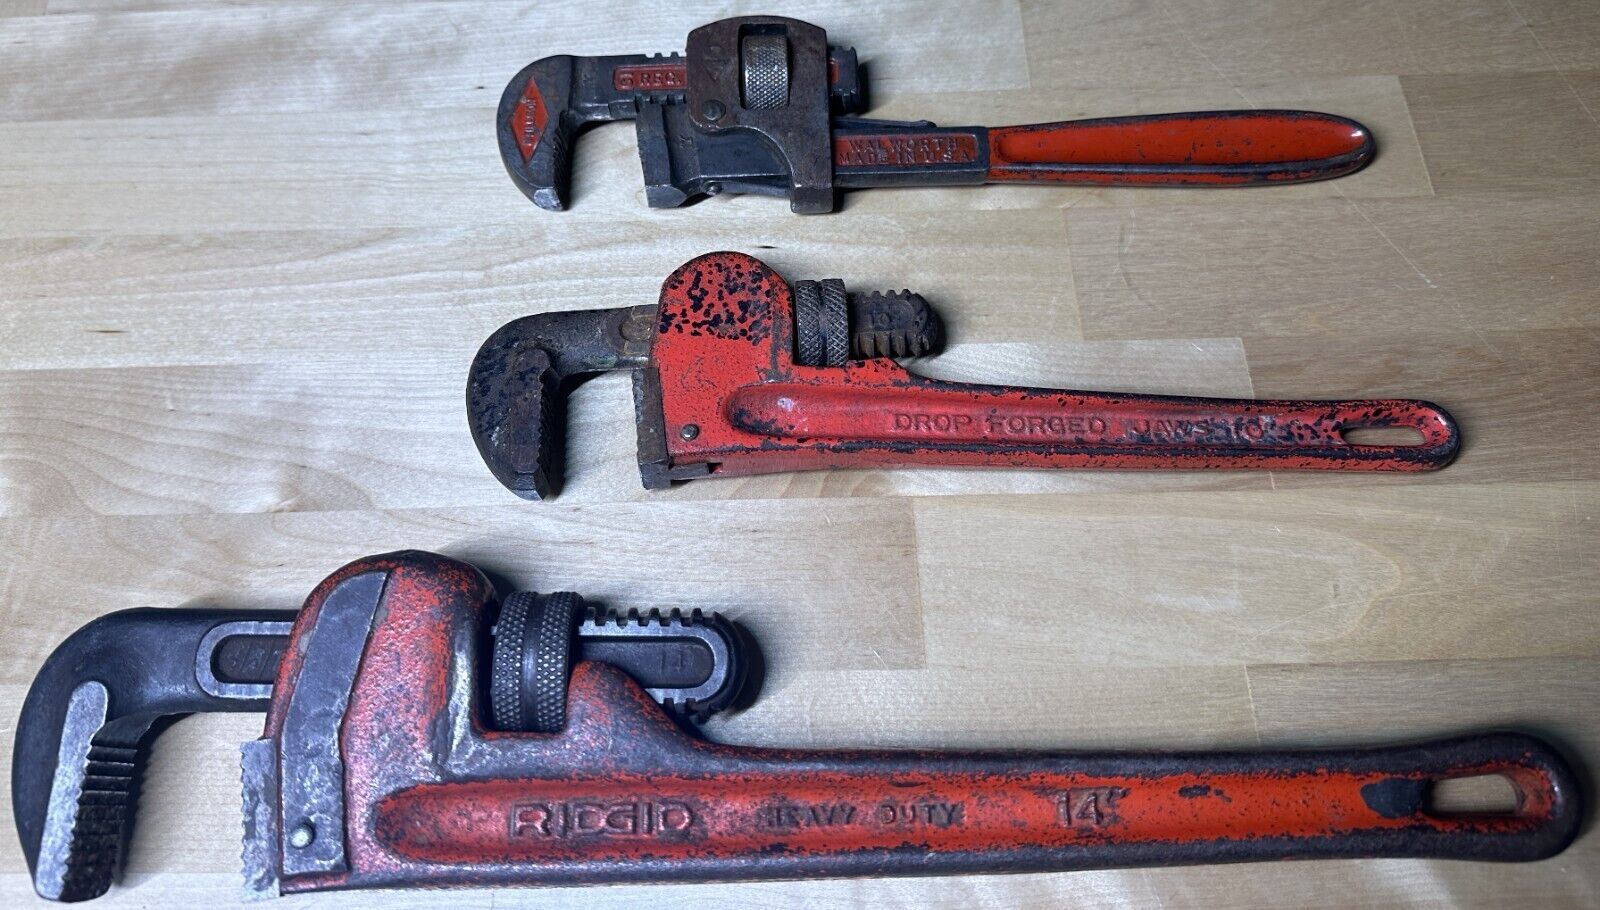 Vintage Ridgid 14” Pipe Wrench Heavy Duty + JAWS 10" + Stillson 10" Pipe Wrench - $31.68